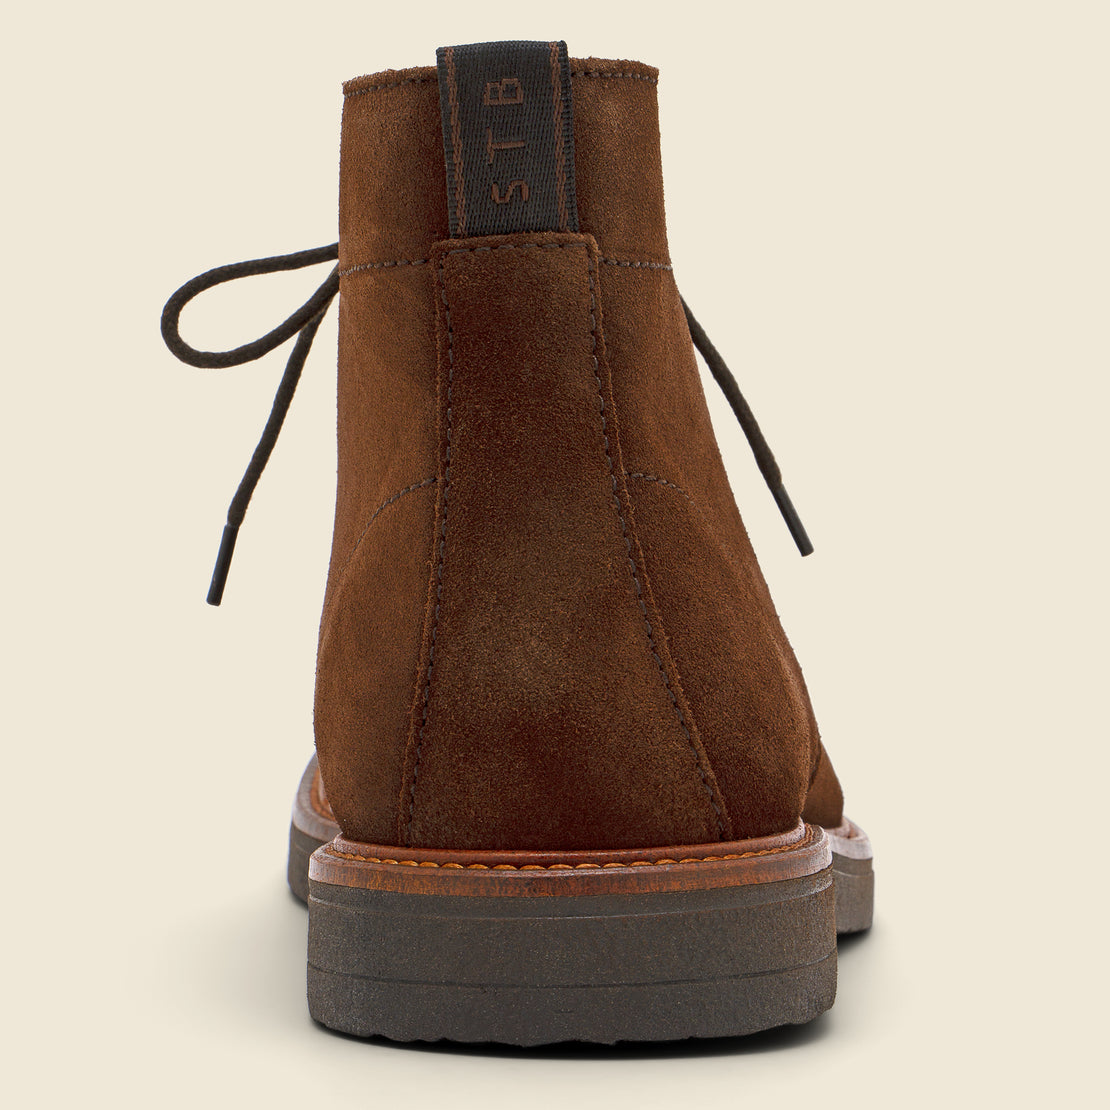 Kip Suede Apron Boot - Brown - Shoe the Bear - STAG Provisions - Shoes - Boots / Chukkas